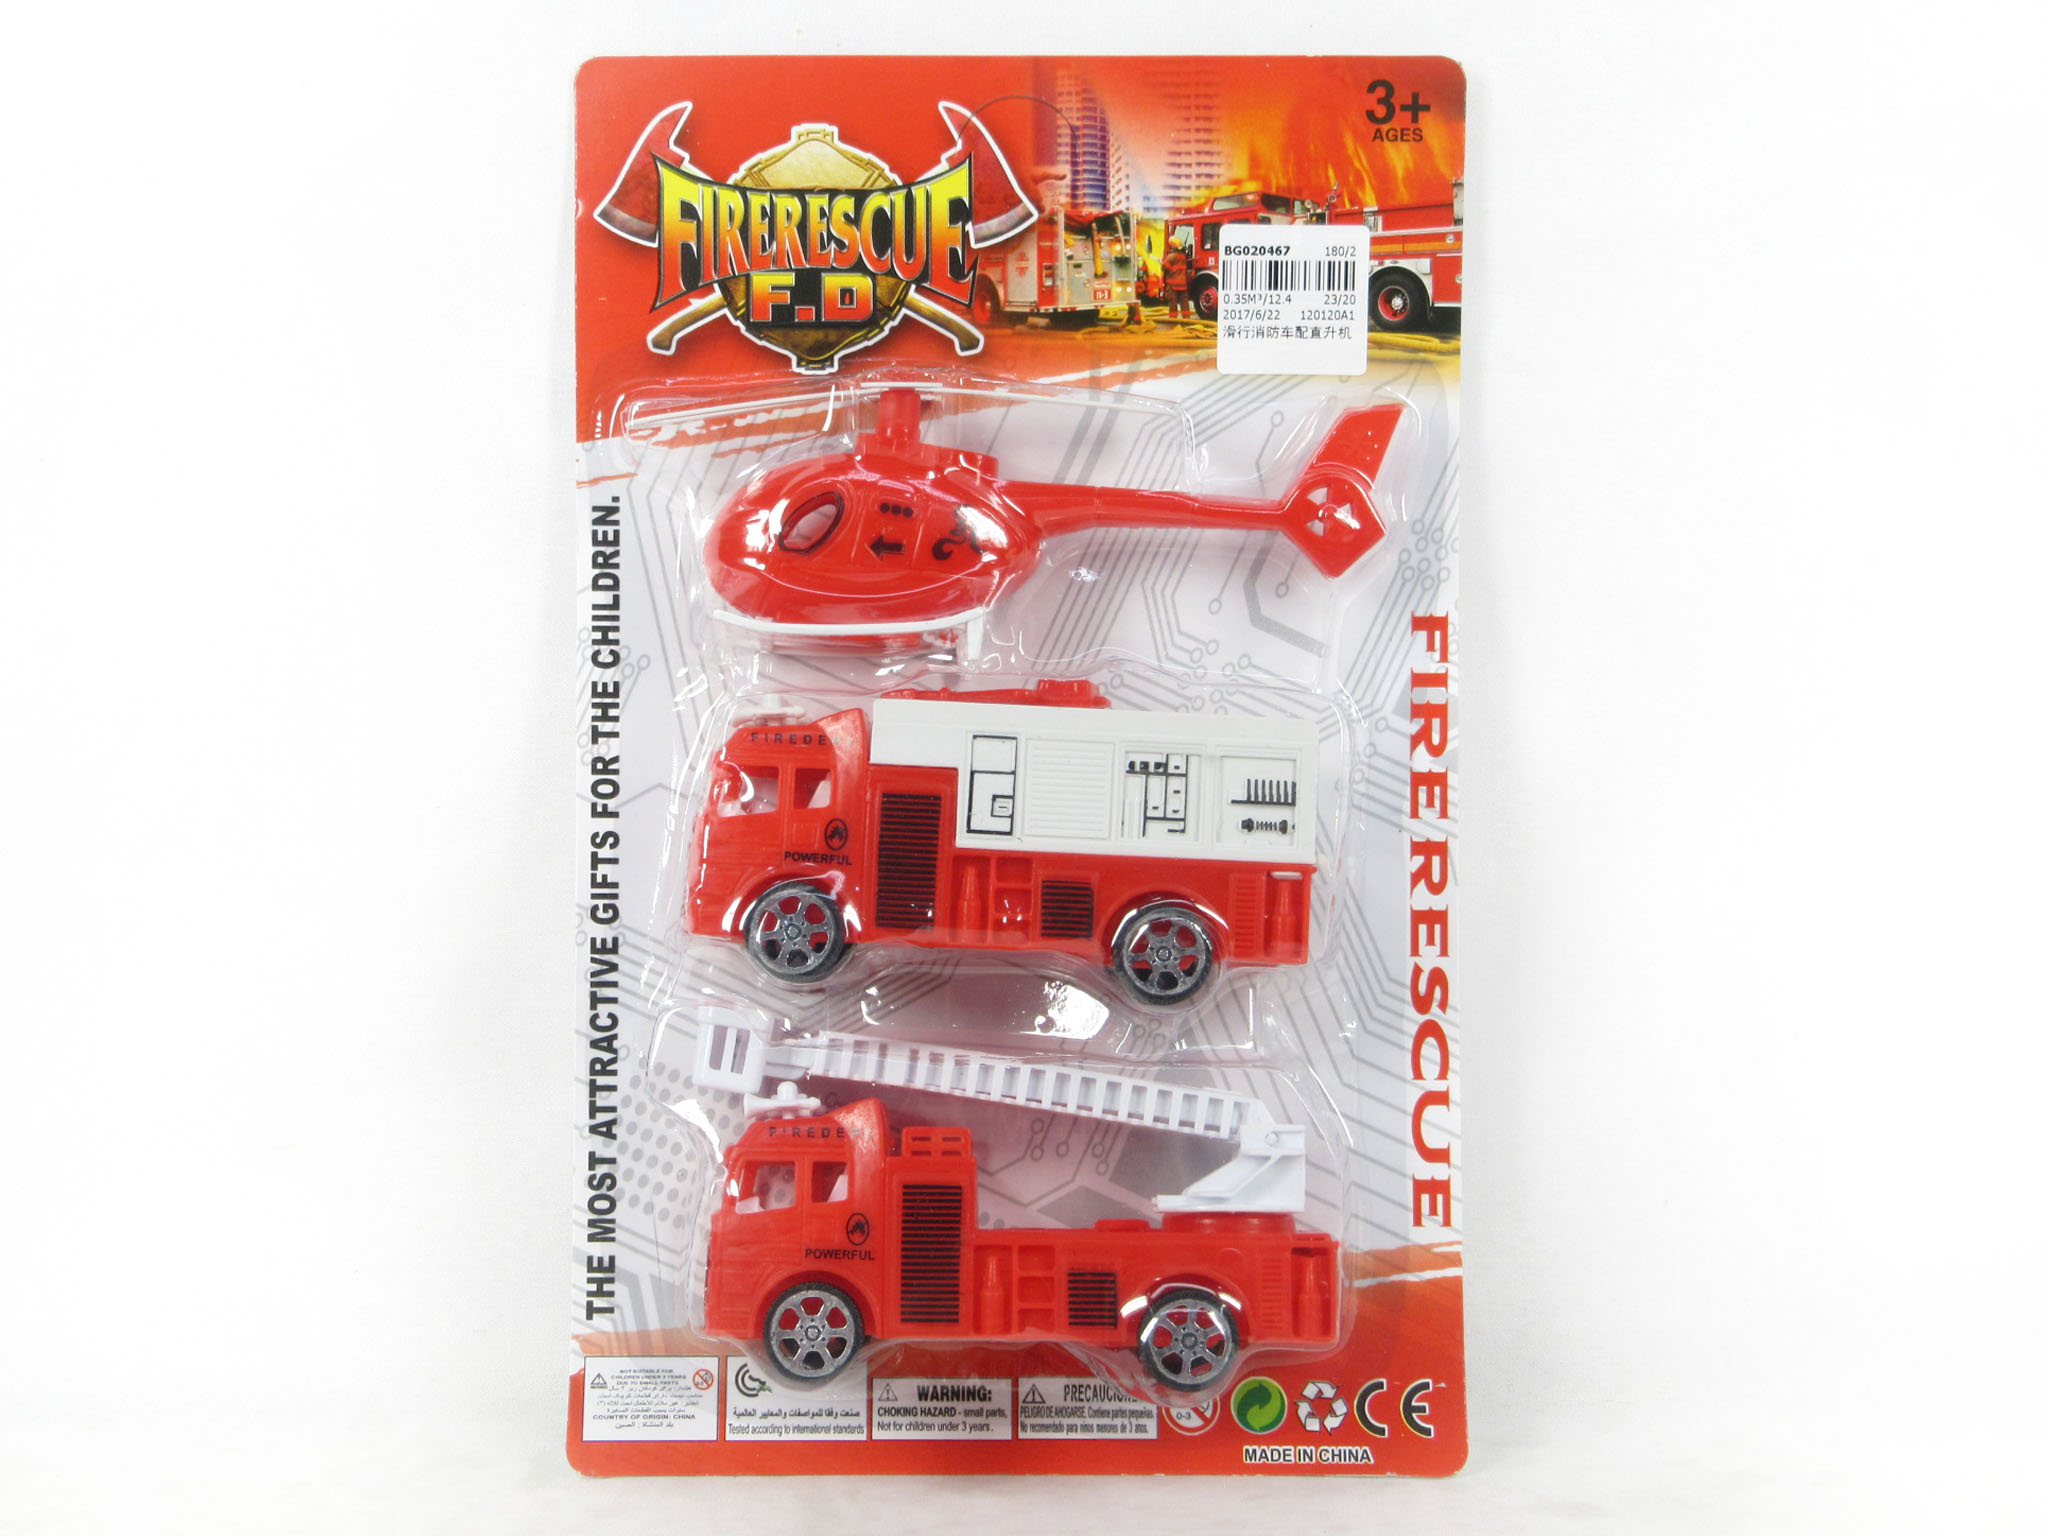 Free Wheel Fire Engine & Helicopter toys